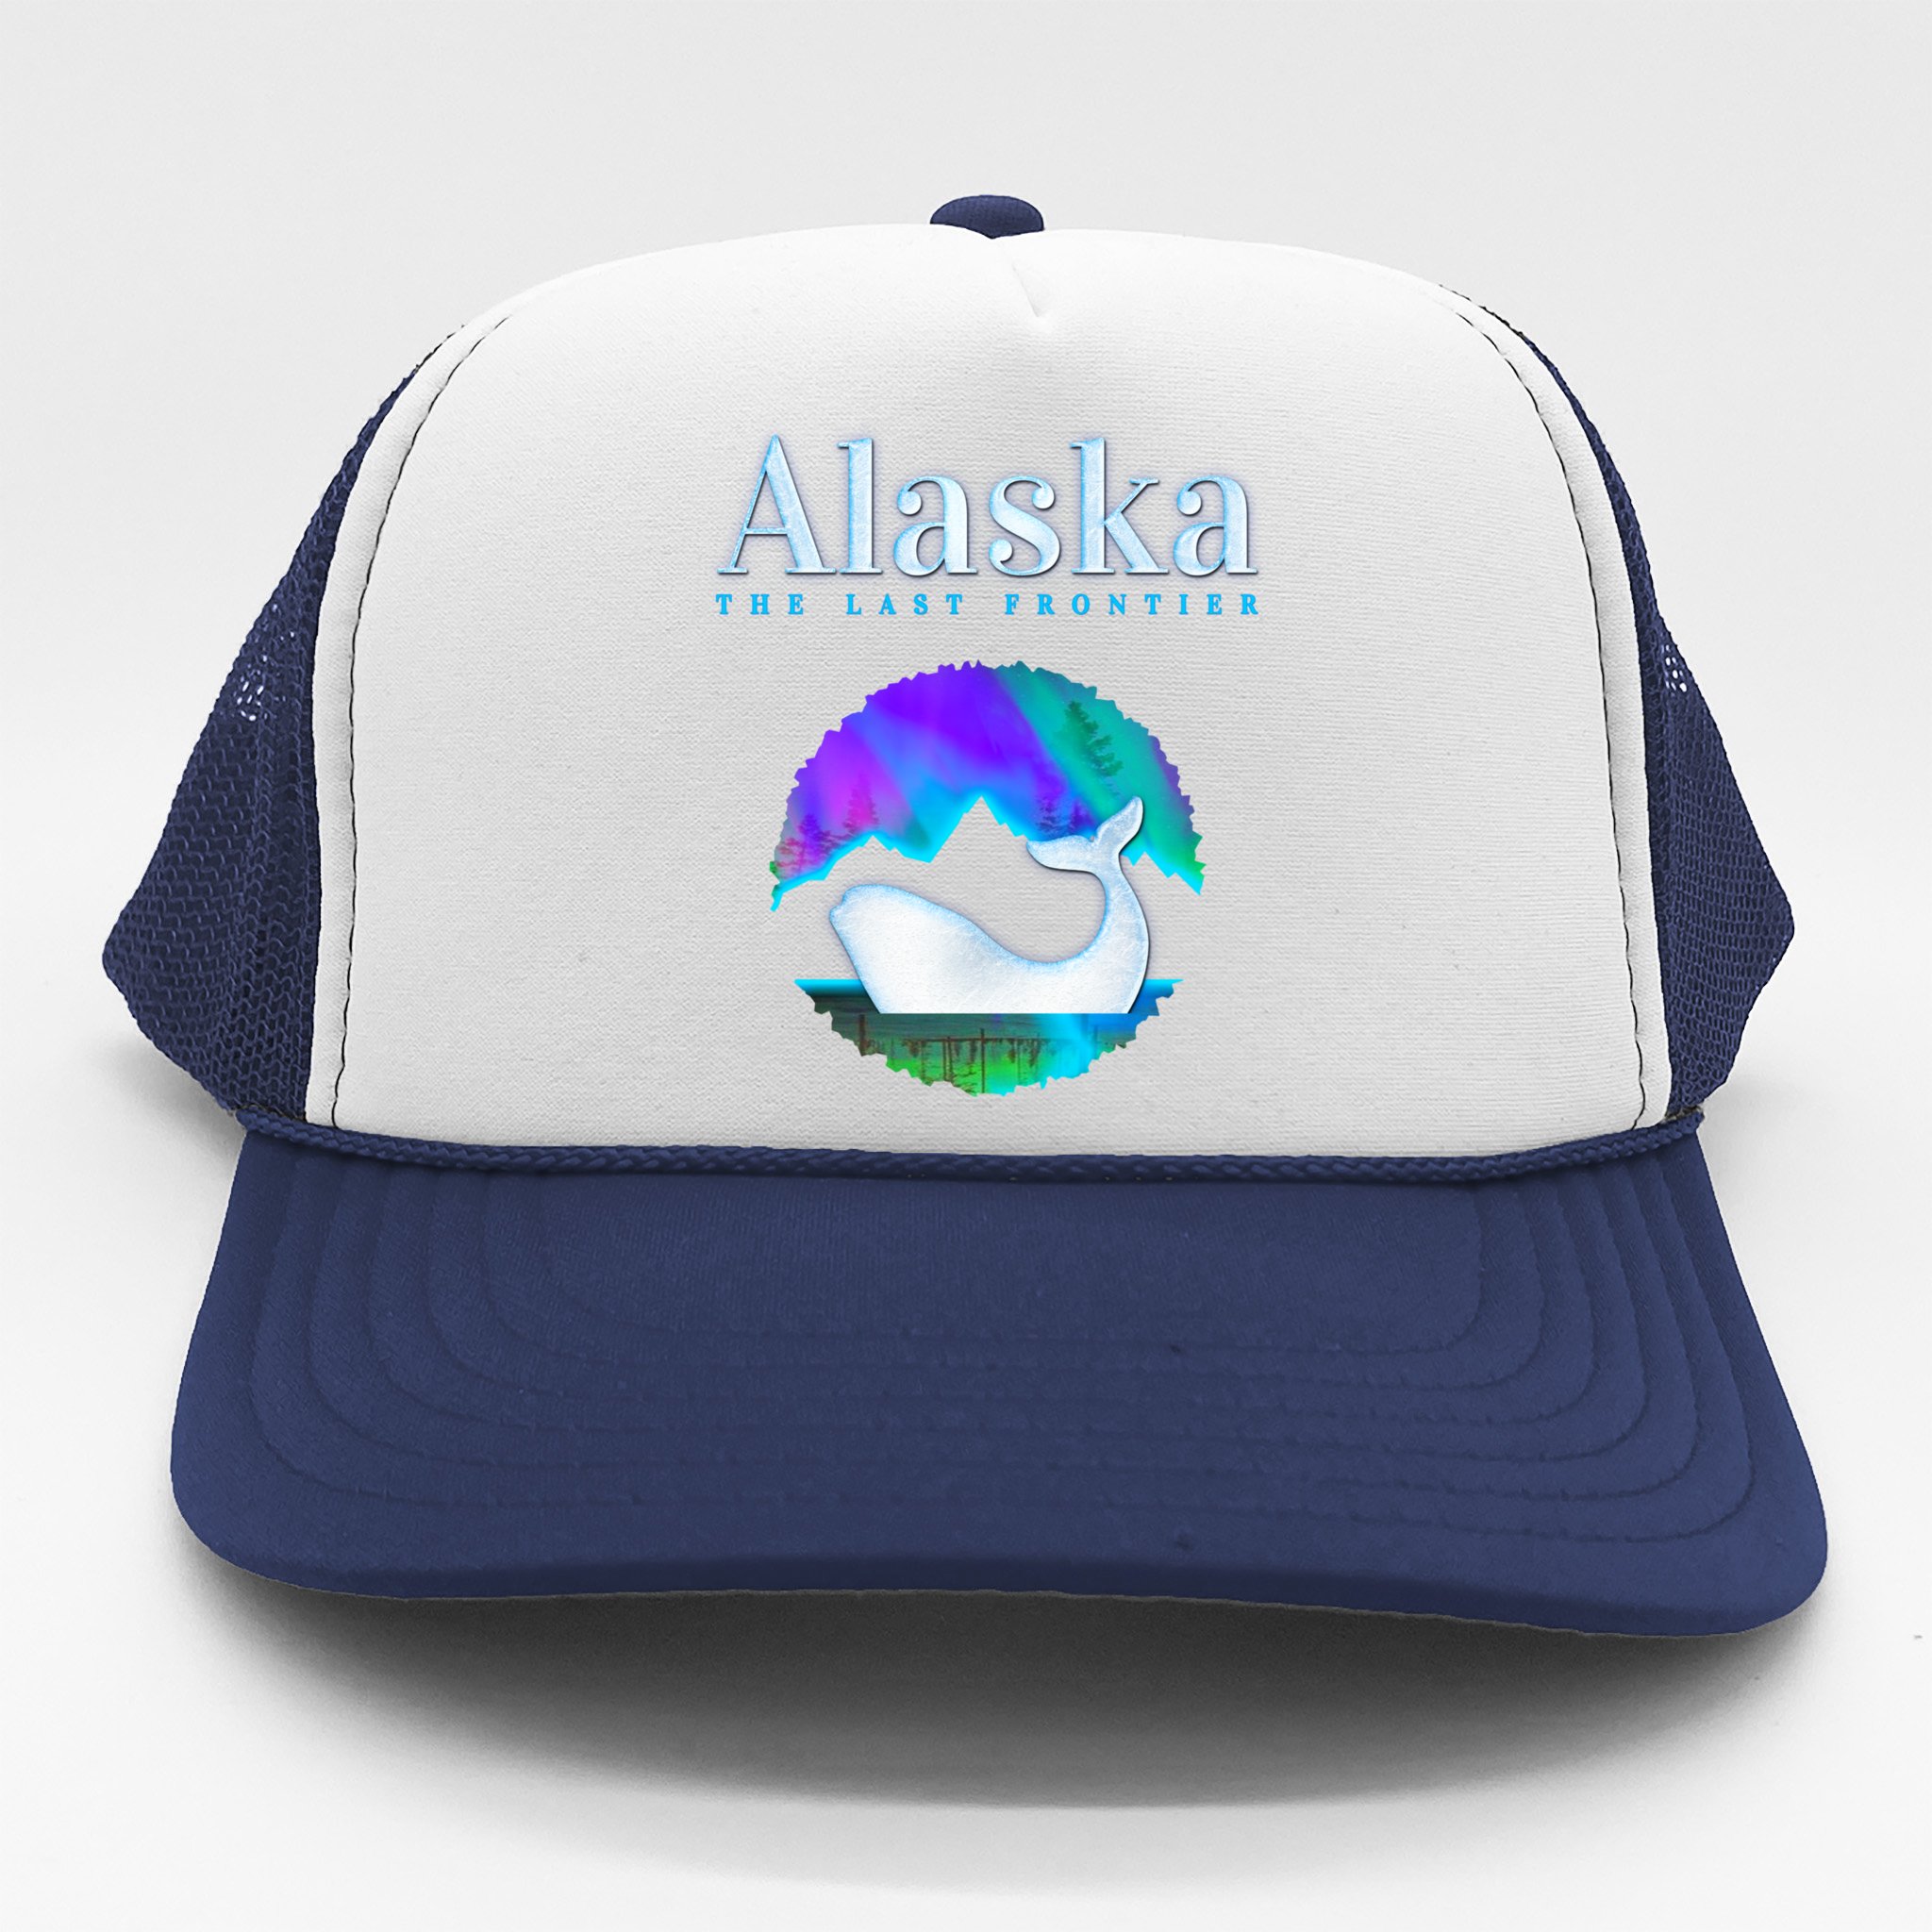 Alaska Northern Lights Orca Whale with Aurora Borealis Meaningful Gift Trucker Hat